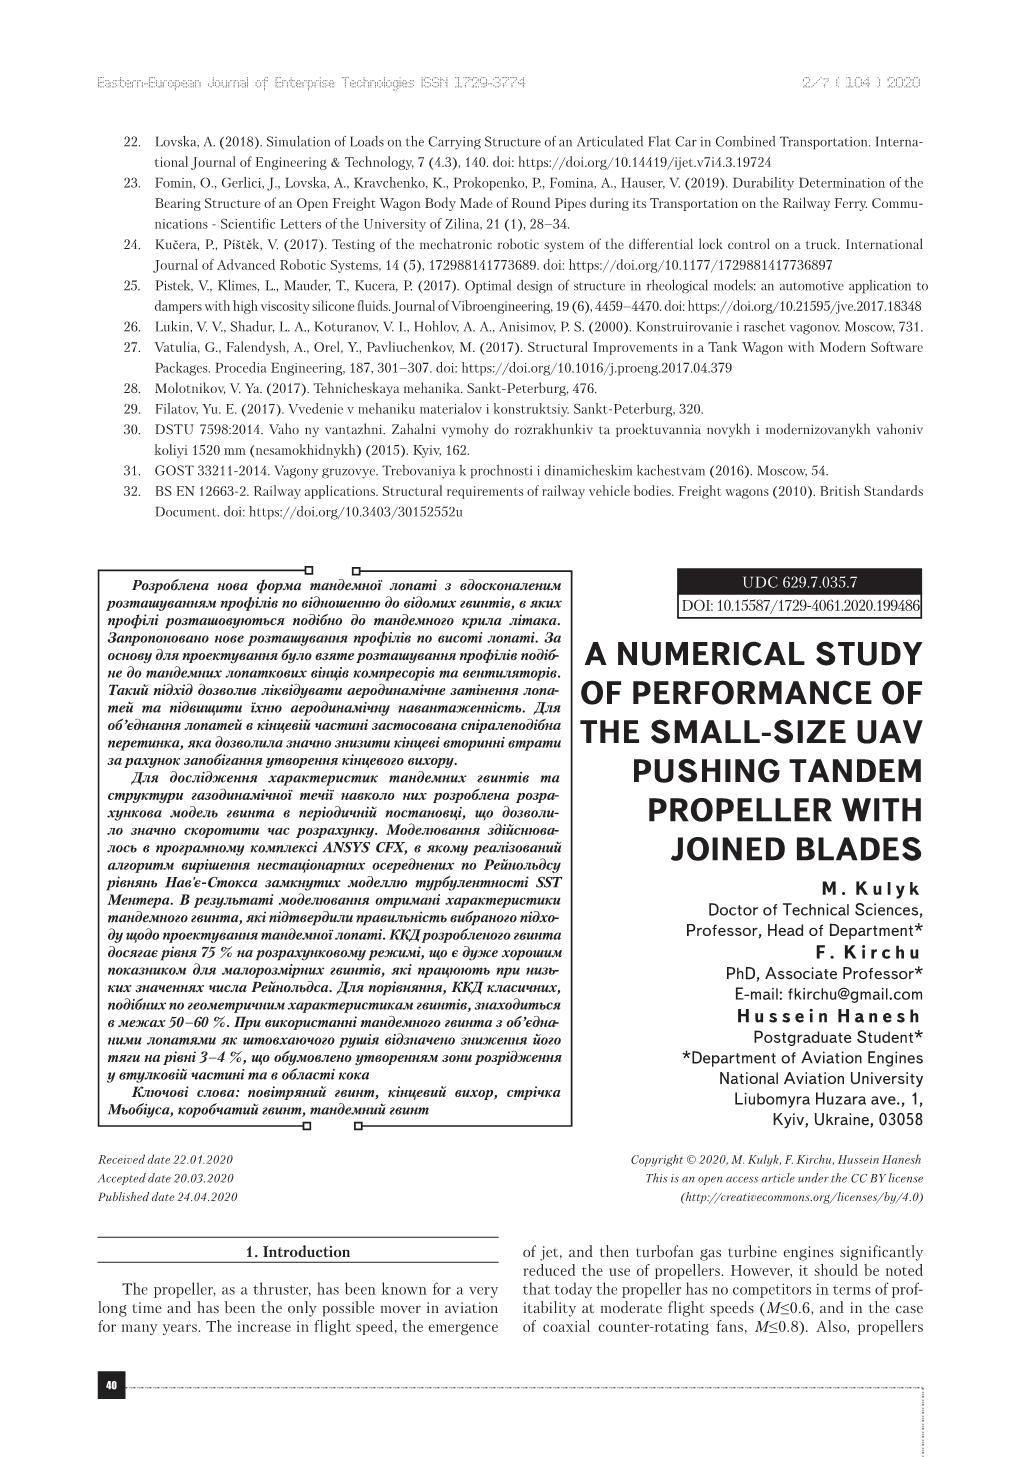 A Numerical Study of Performance of the Small